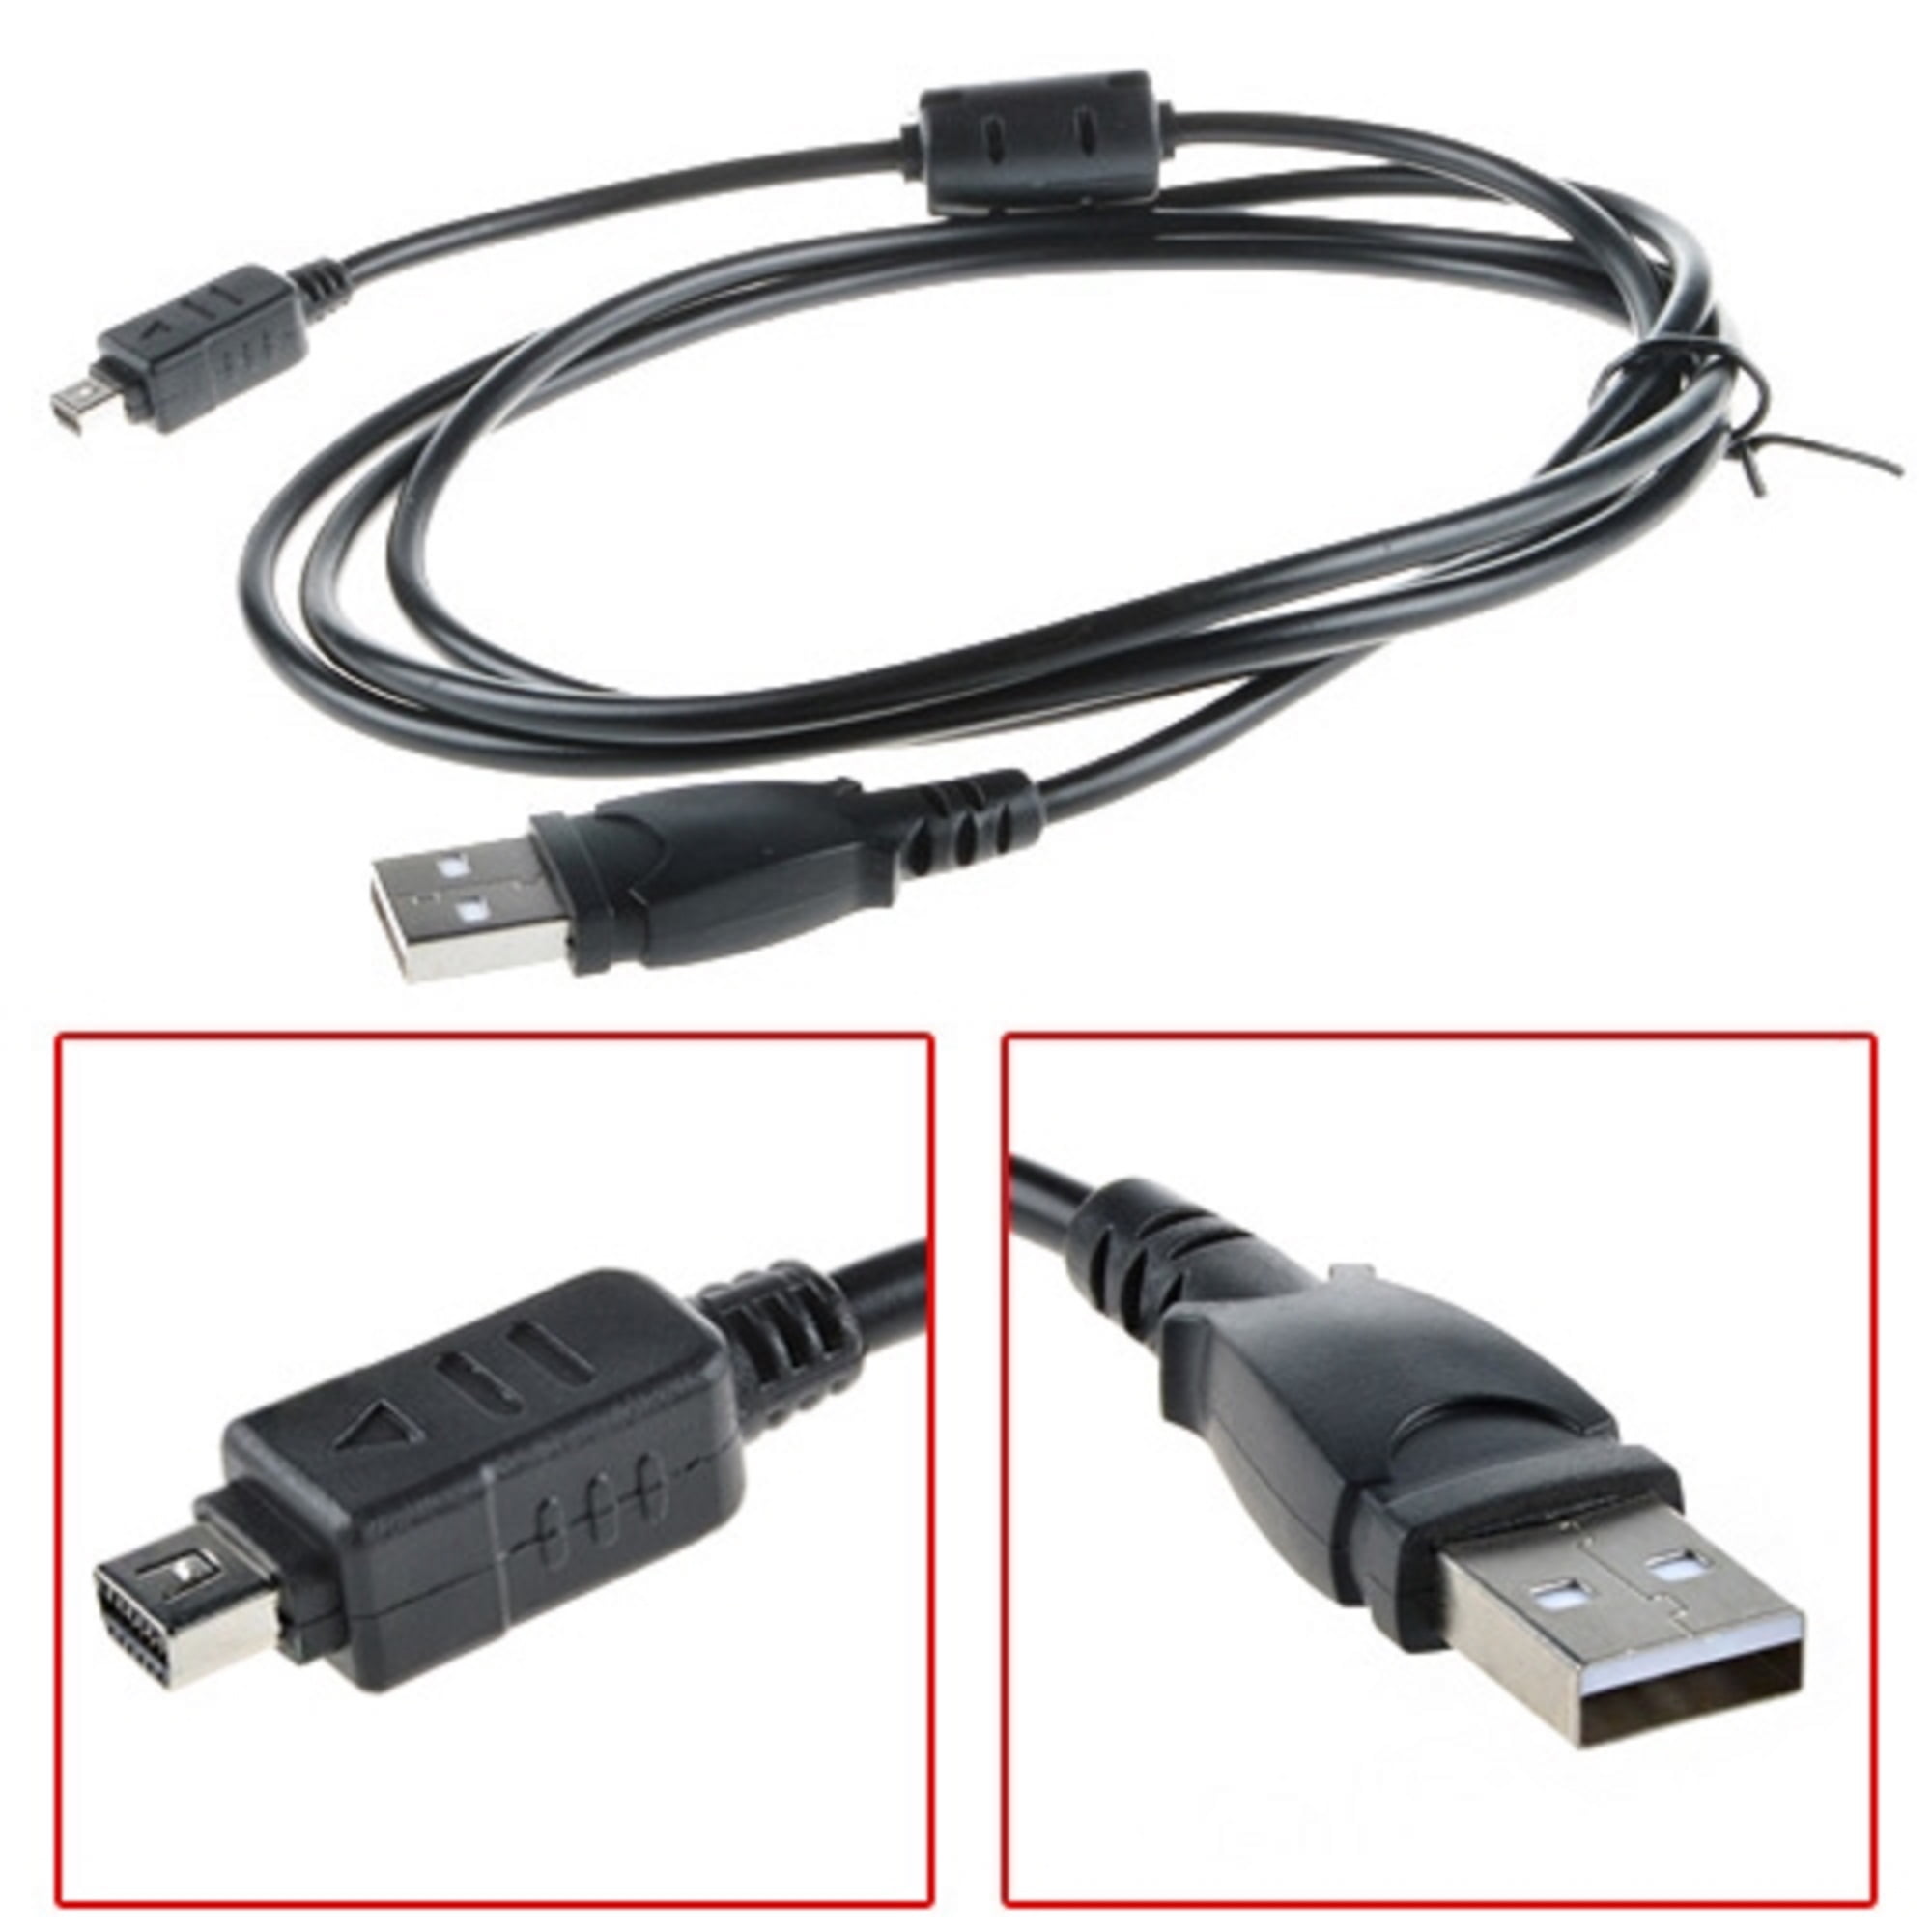 K-MAINS USB DC Charger Data SYNC Cable Cord Replacement for Olympus Tough  TG310 TG320 TG610 Camera 